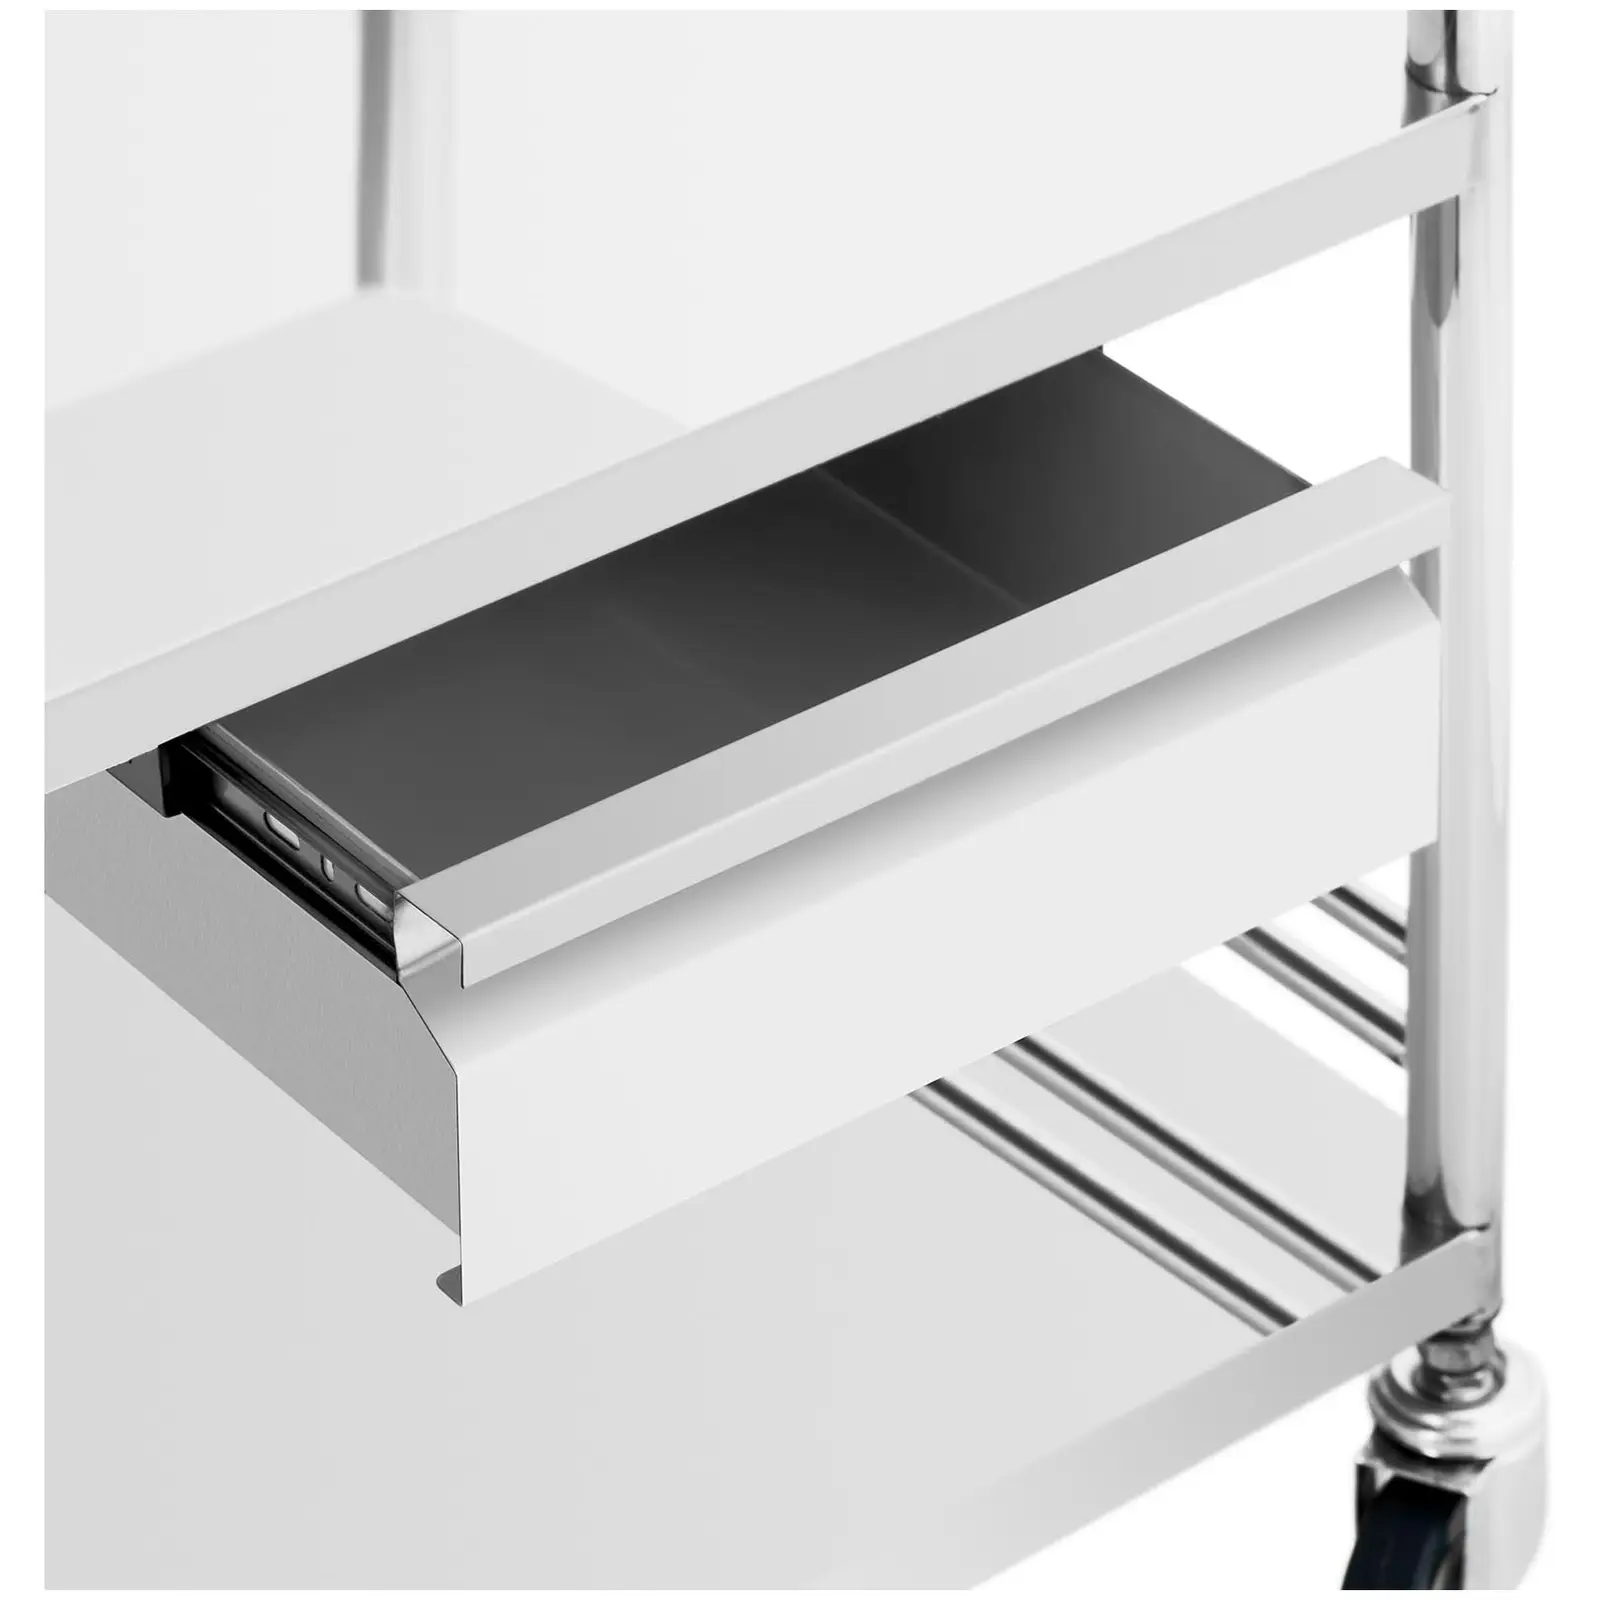 Laboratory Trolley - stainless steel - 3 shelves - 1 drawer - 30 kg